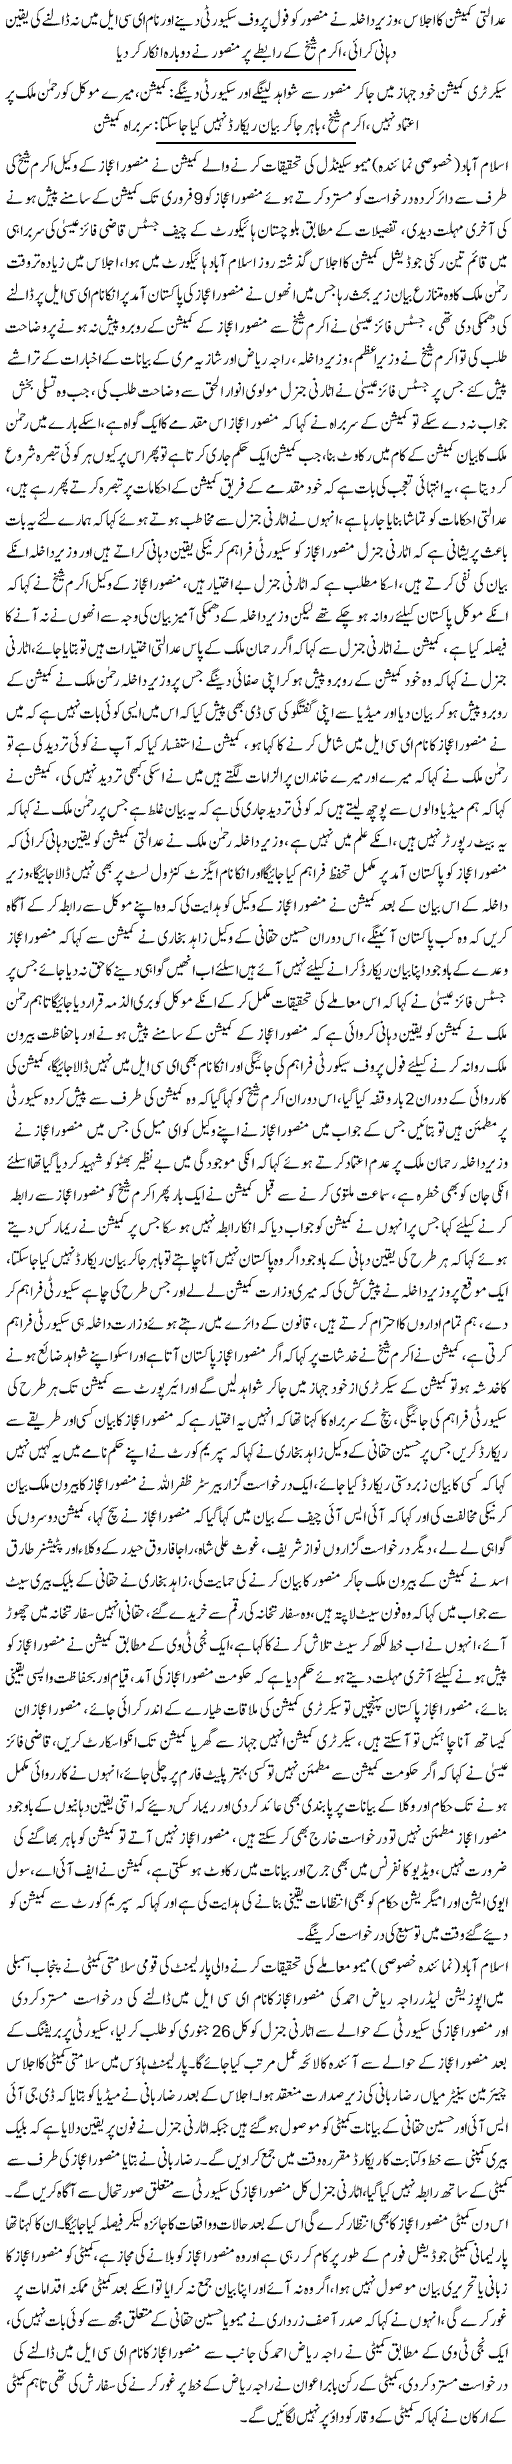 Memo Commission Gives Last Chance To Mansoor Ijaz - News in Urdu